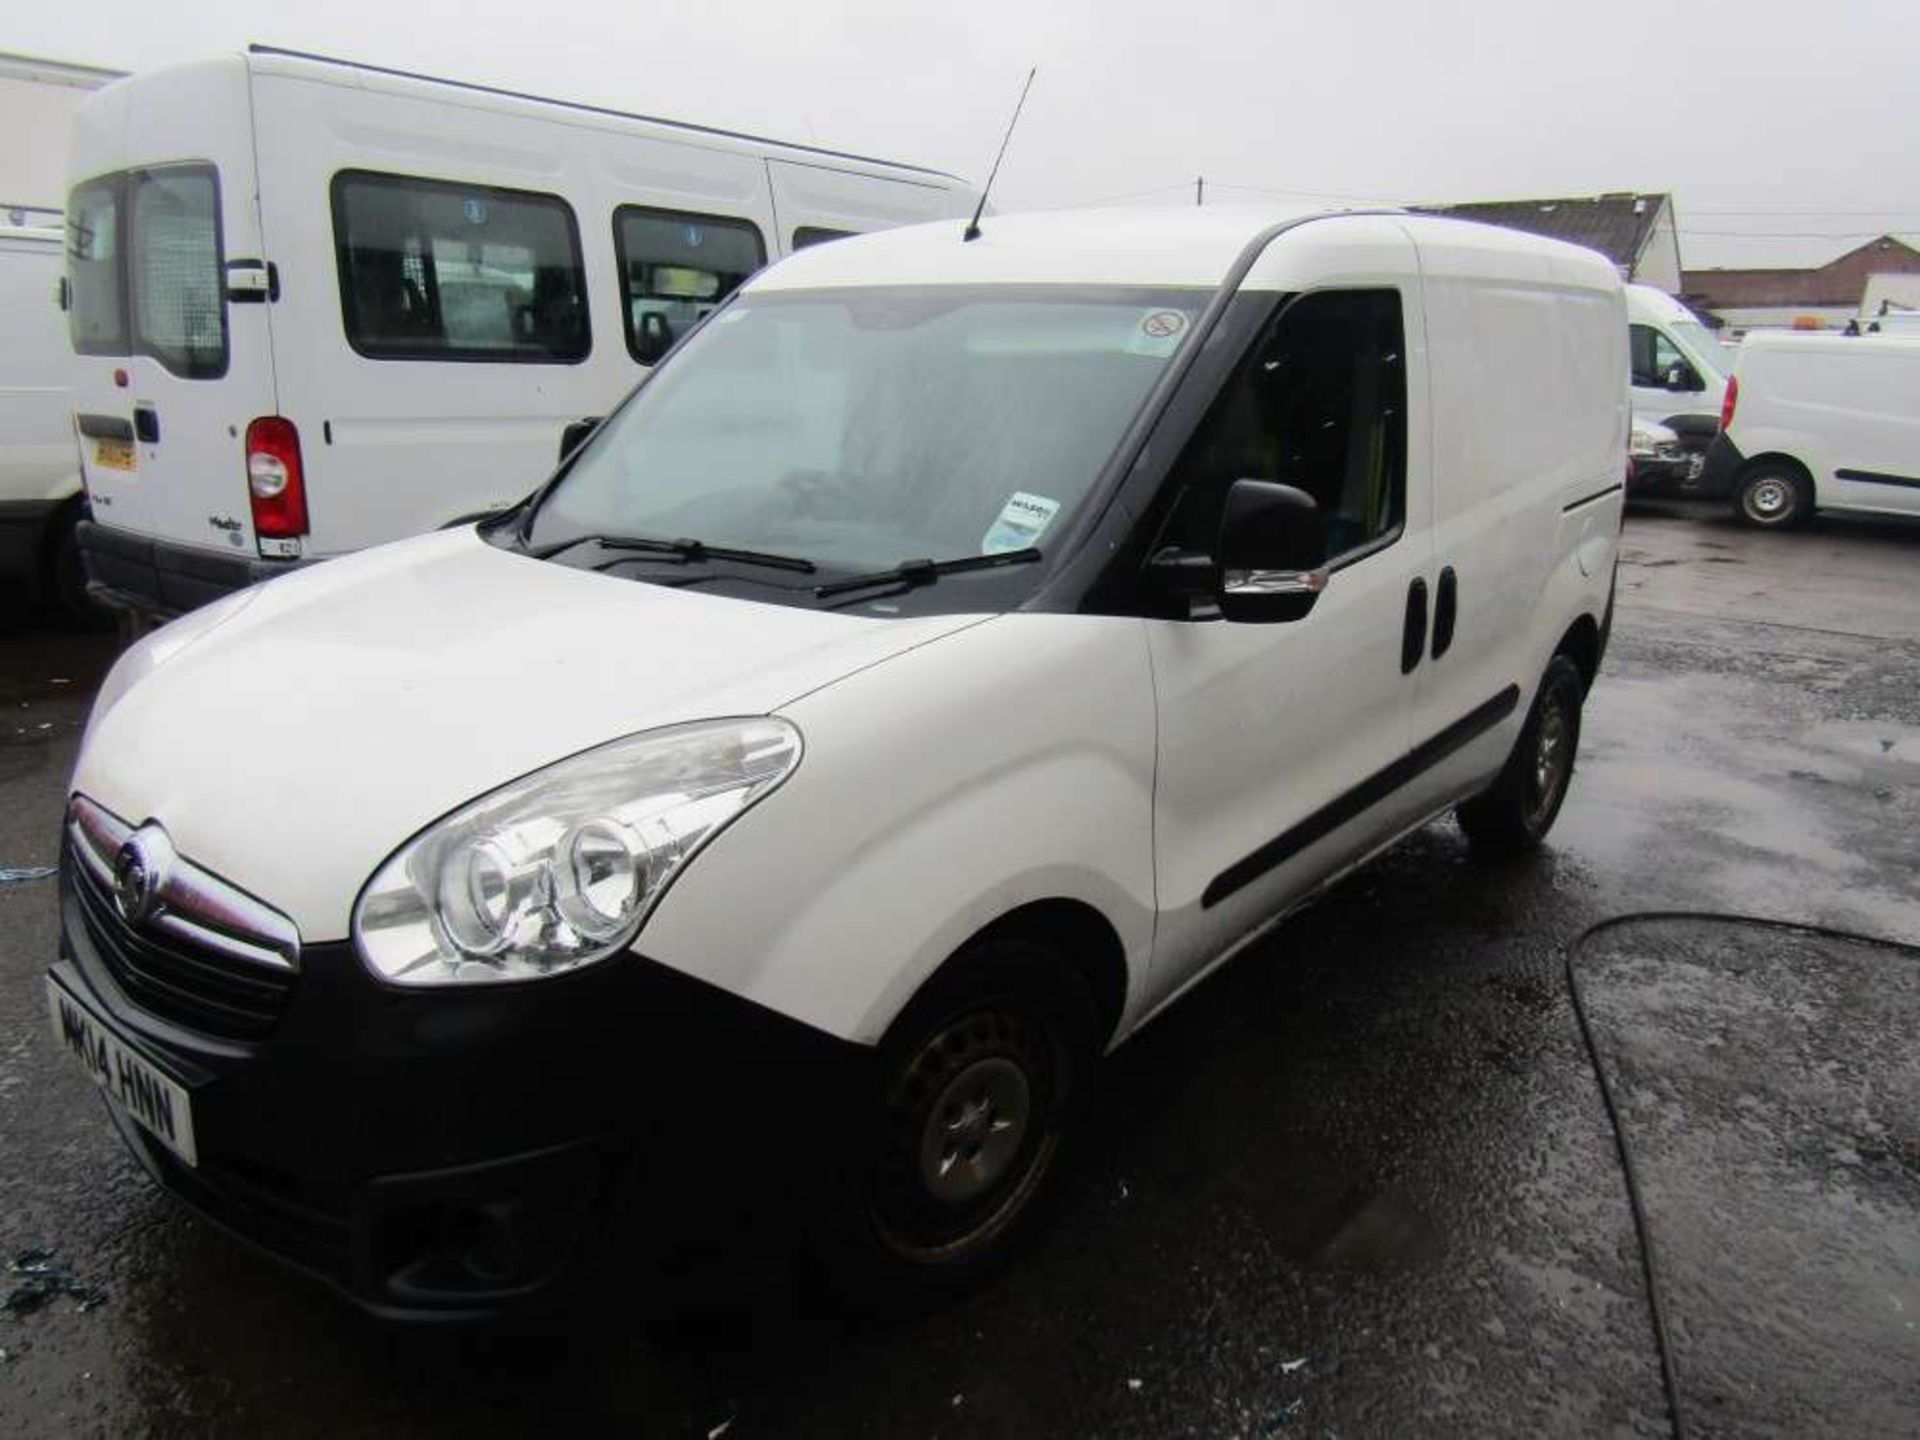 2014 14 reg Vauxhall Combo 2300 L1H1 CDTI (Runs & Drives but engine issues) (Direct UU Water) - Image 2 of 7